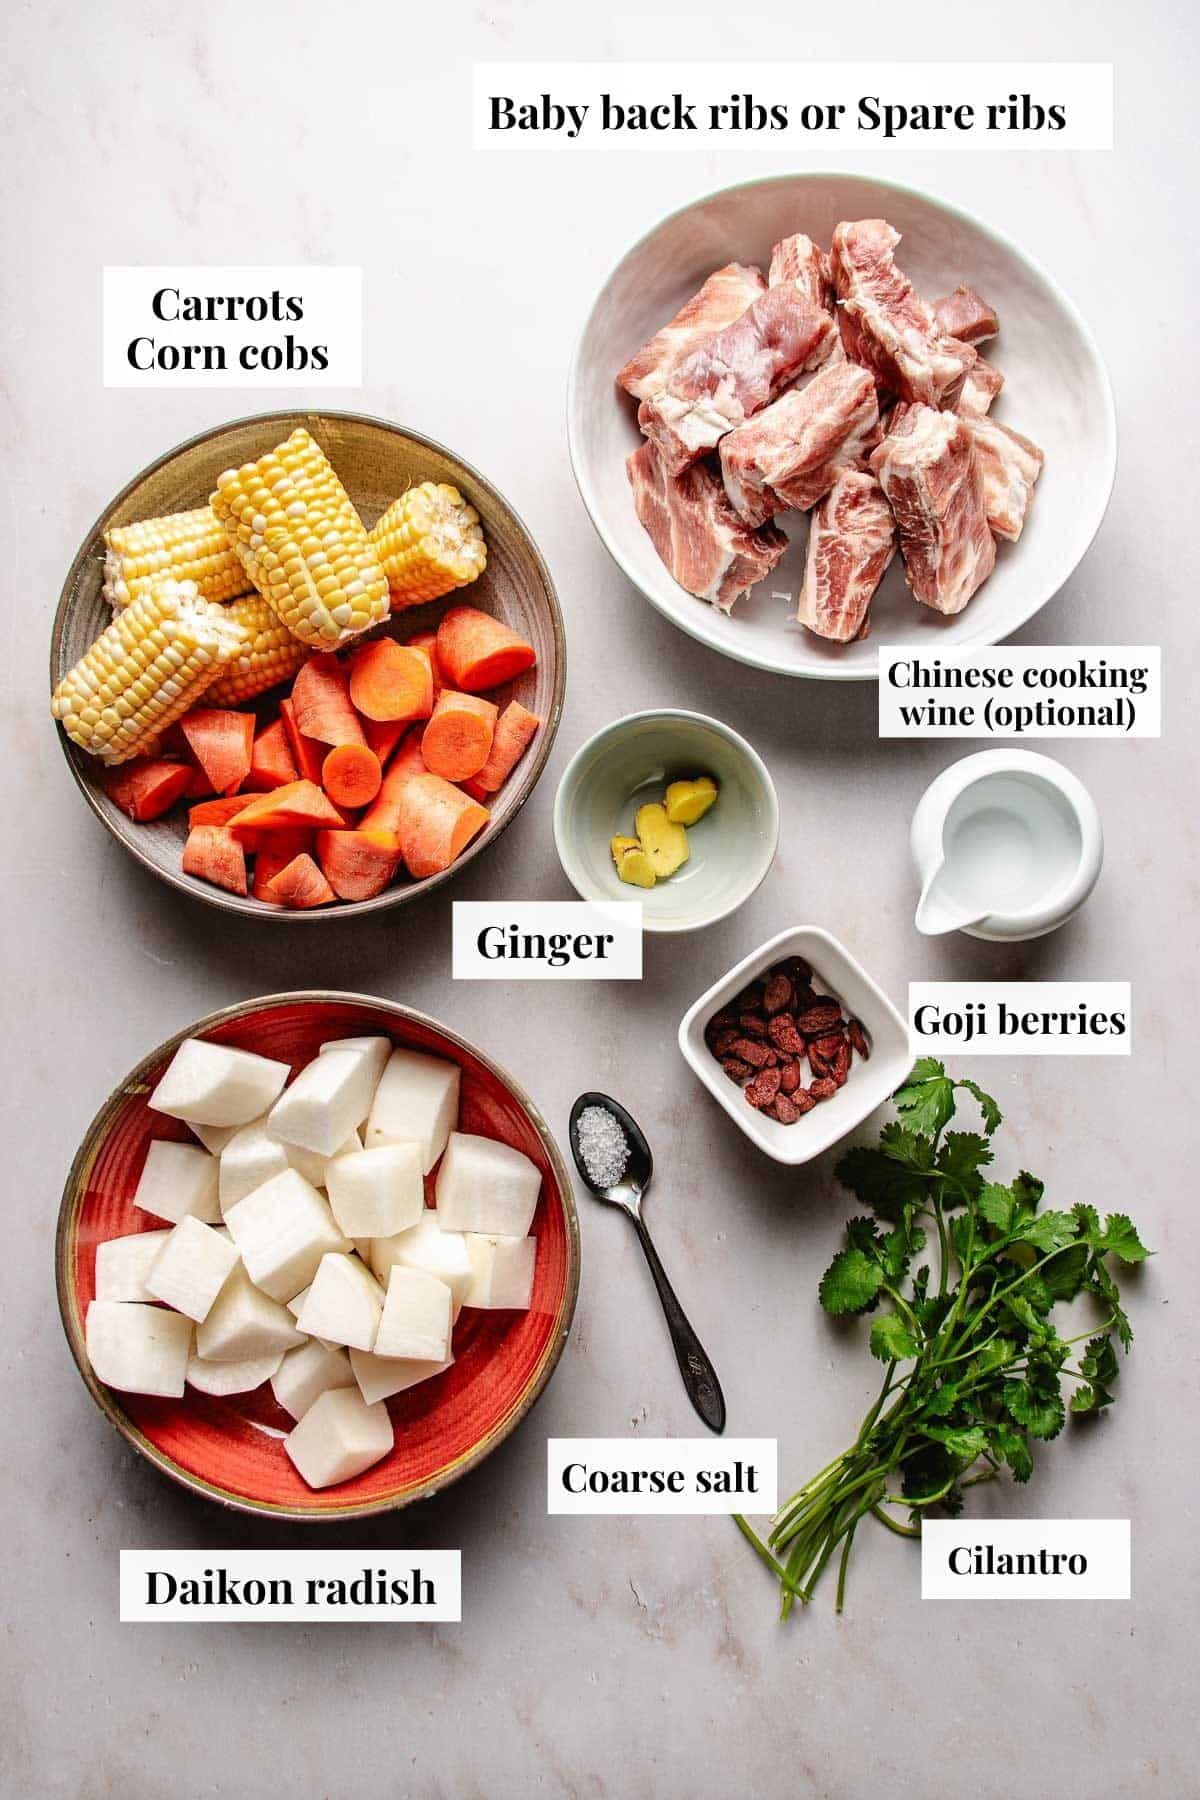 Photo shows ingredients used to make the soup.